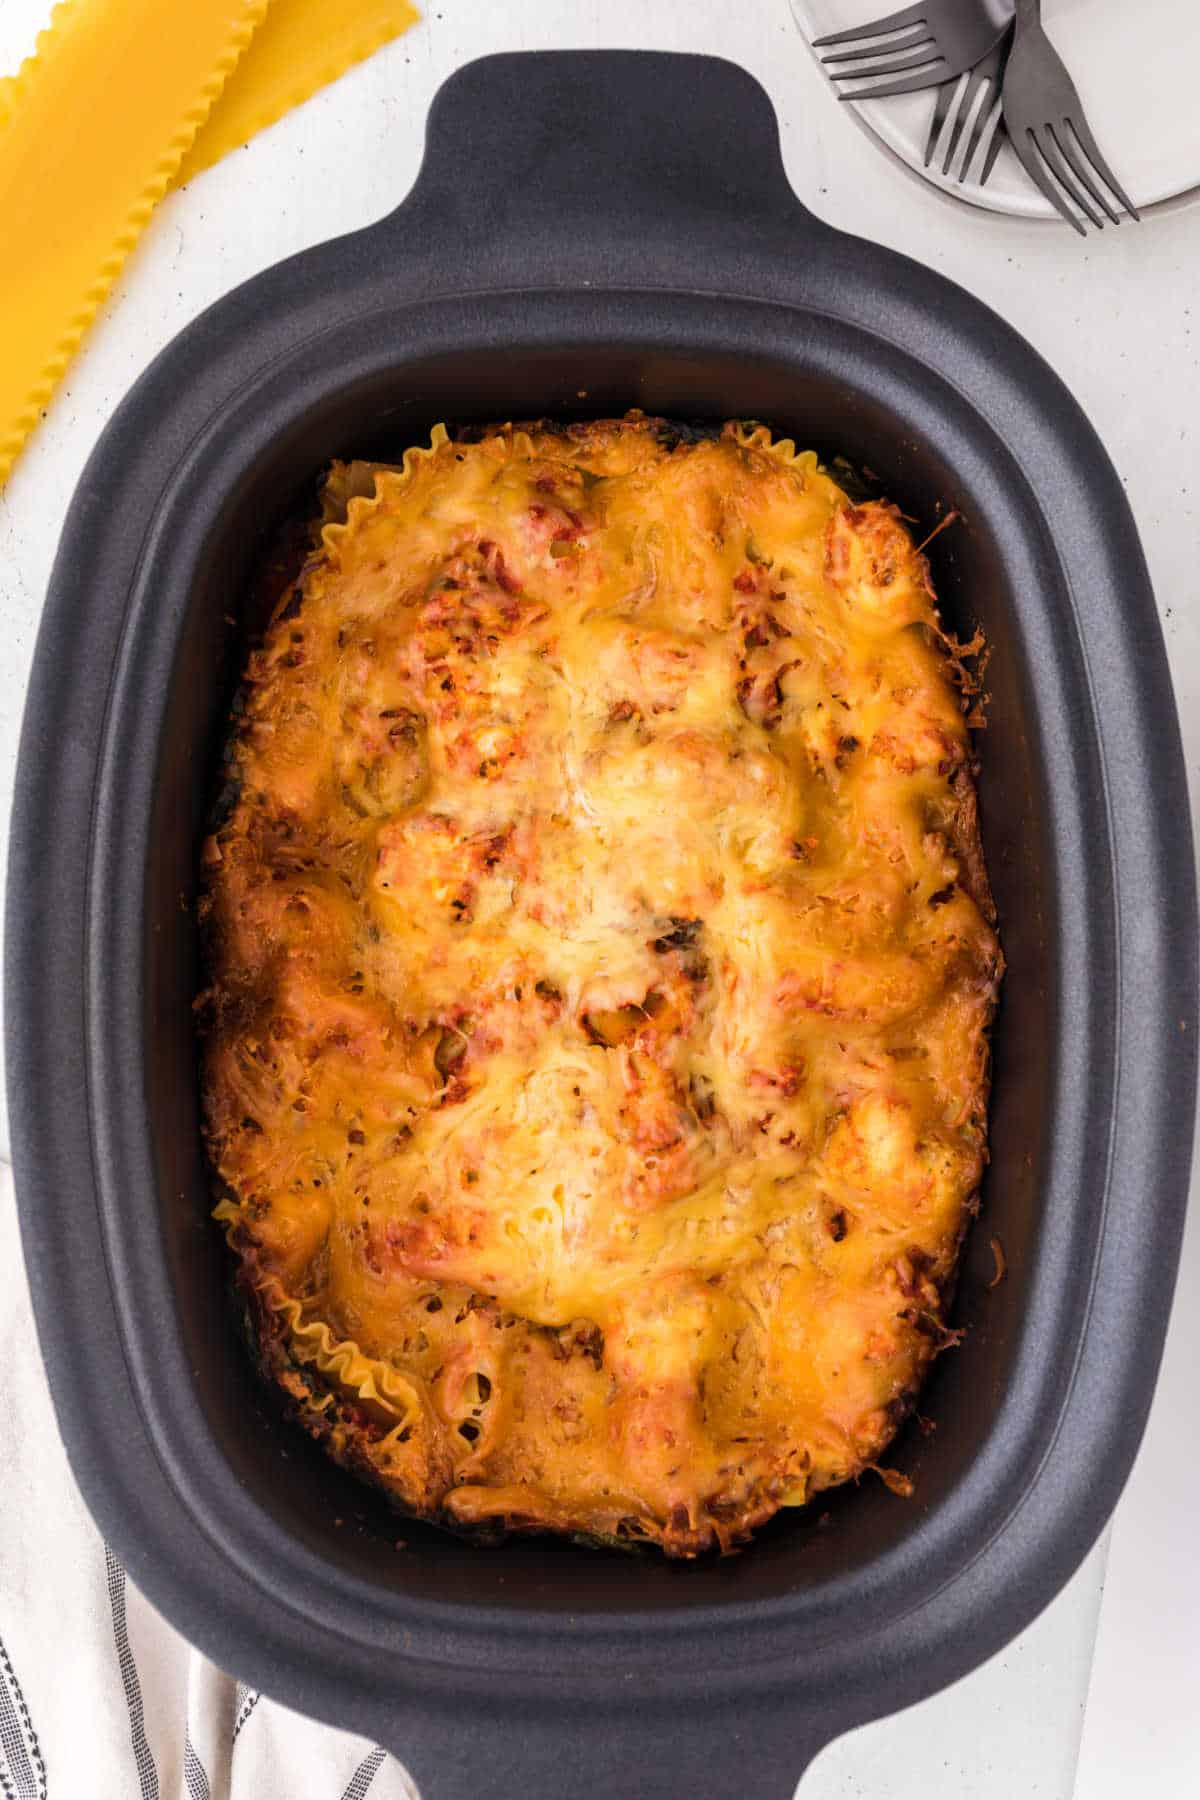 Cooked lasagna in a slow cooker.